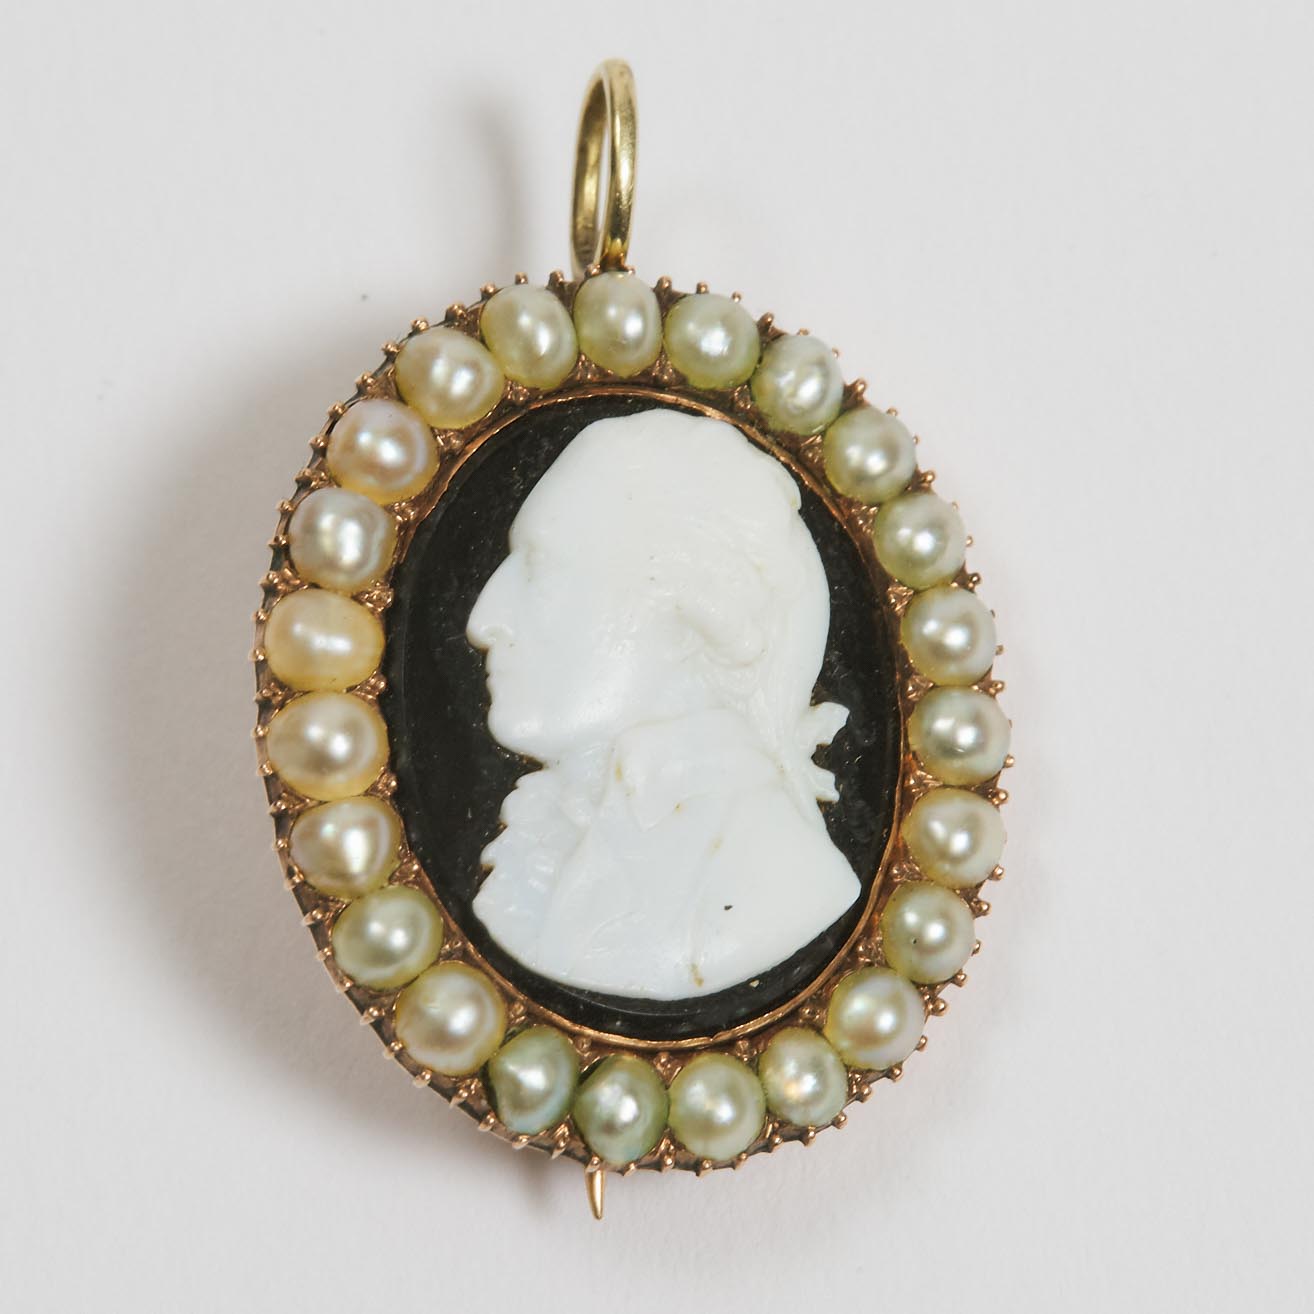 Rose Gold, Pearl and Sardonyx Cameo Mourning Brooch Pendant for Charles Dumergue, 1814